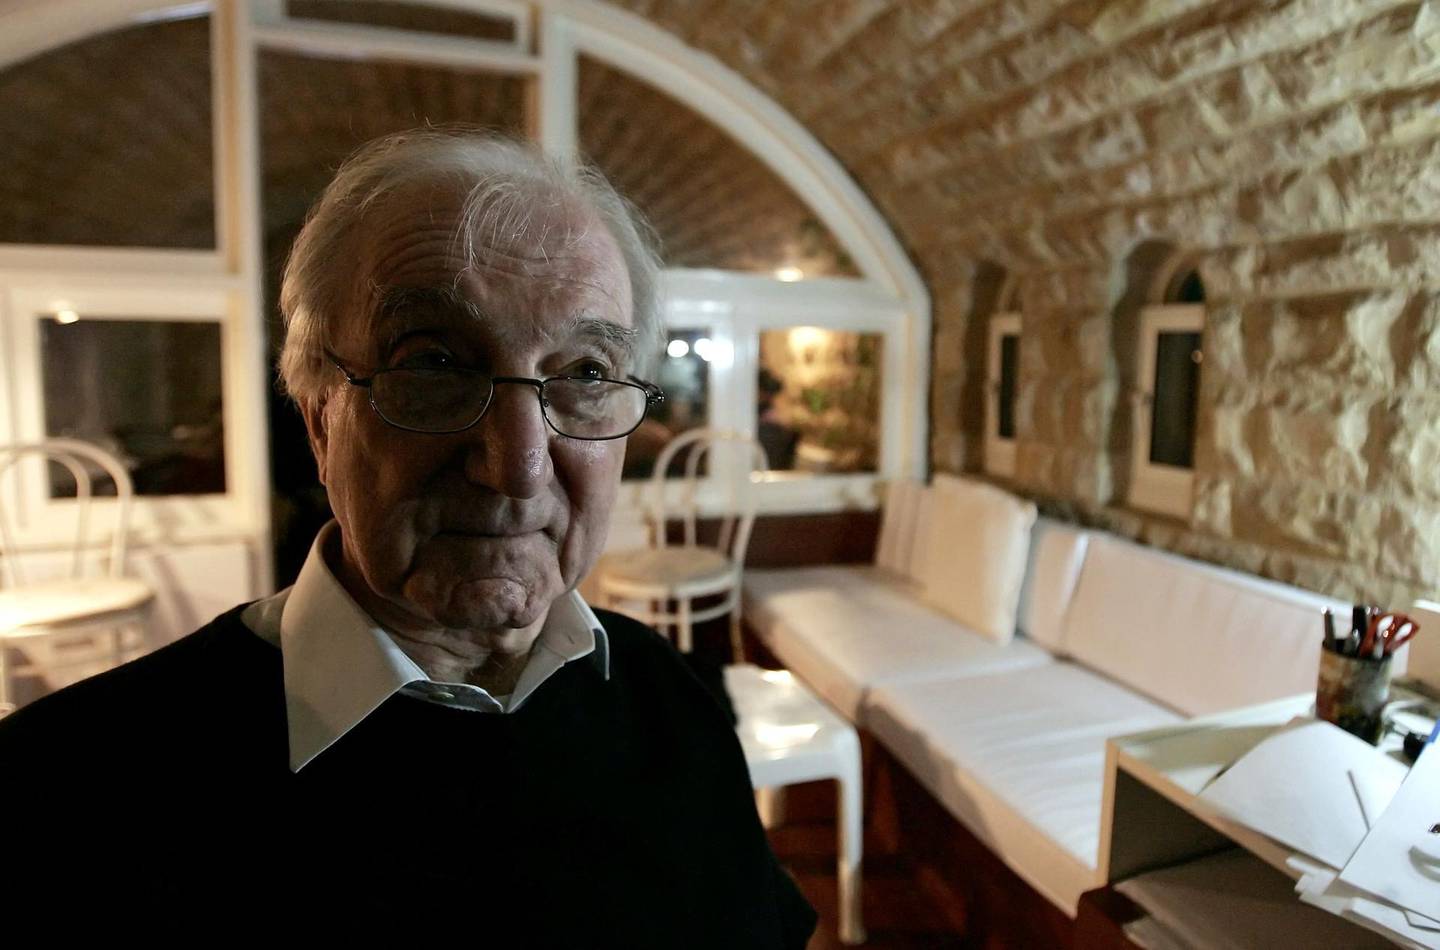 (FILES) In this file photo taken on April 24, 2009, Iraqi architect Rifat Chadirji is pictured at his home office in the coastal Lebanese town of Halat. The "father" of Iraqi modern architecture, Rifat Chadirji, died late on April 10 in the United Kingdom after contracting the novel coronavirus, friends and Iraqi officials said. / AFP / Joseph EID
